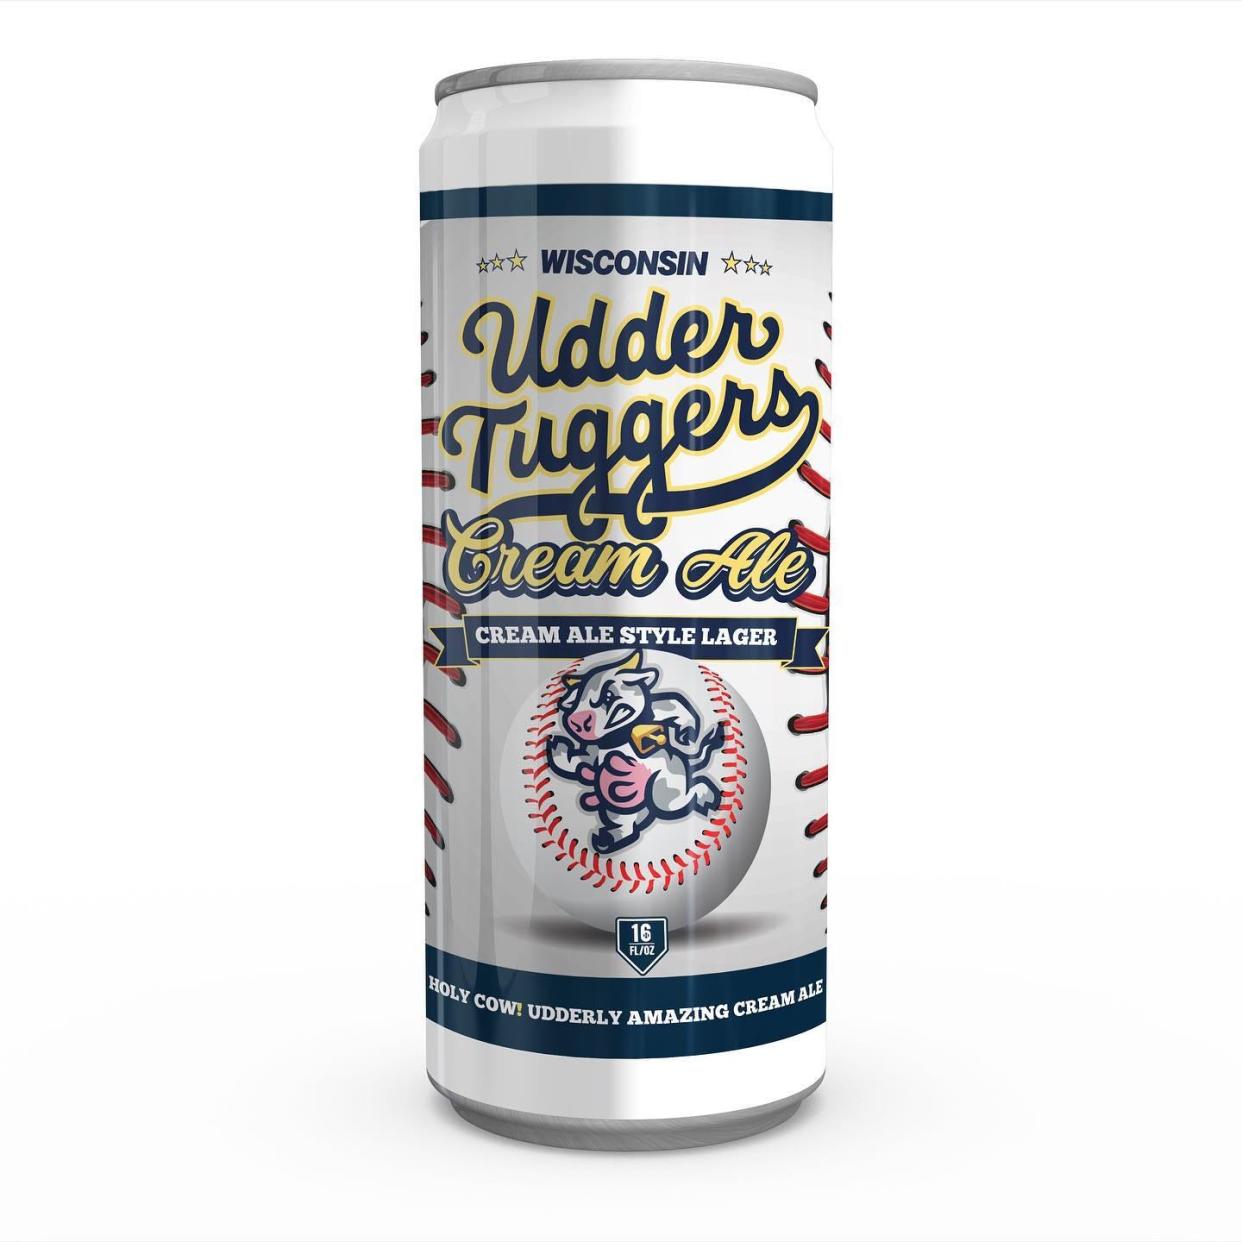 Udder Tuggers Cream Ale is a collaboration between Badger State Brewing Company and Wisconsin Timber Rattlers minor league baseball team.